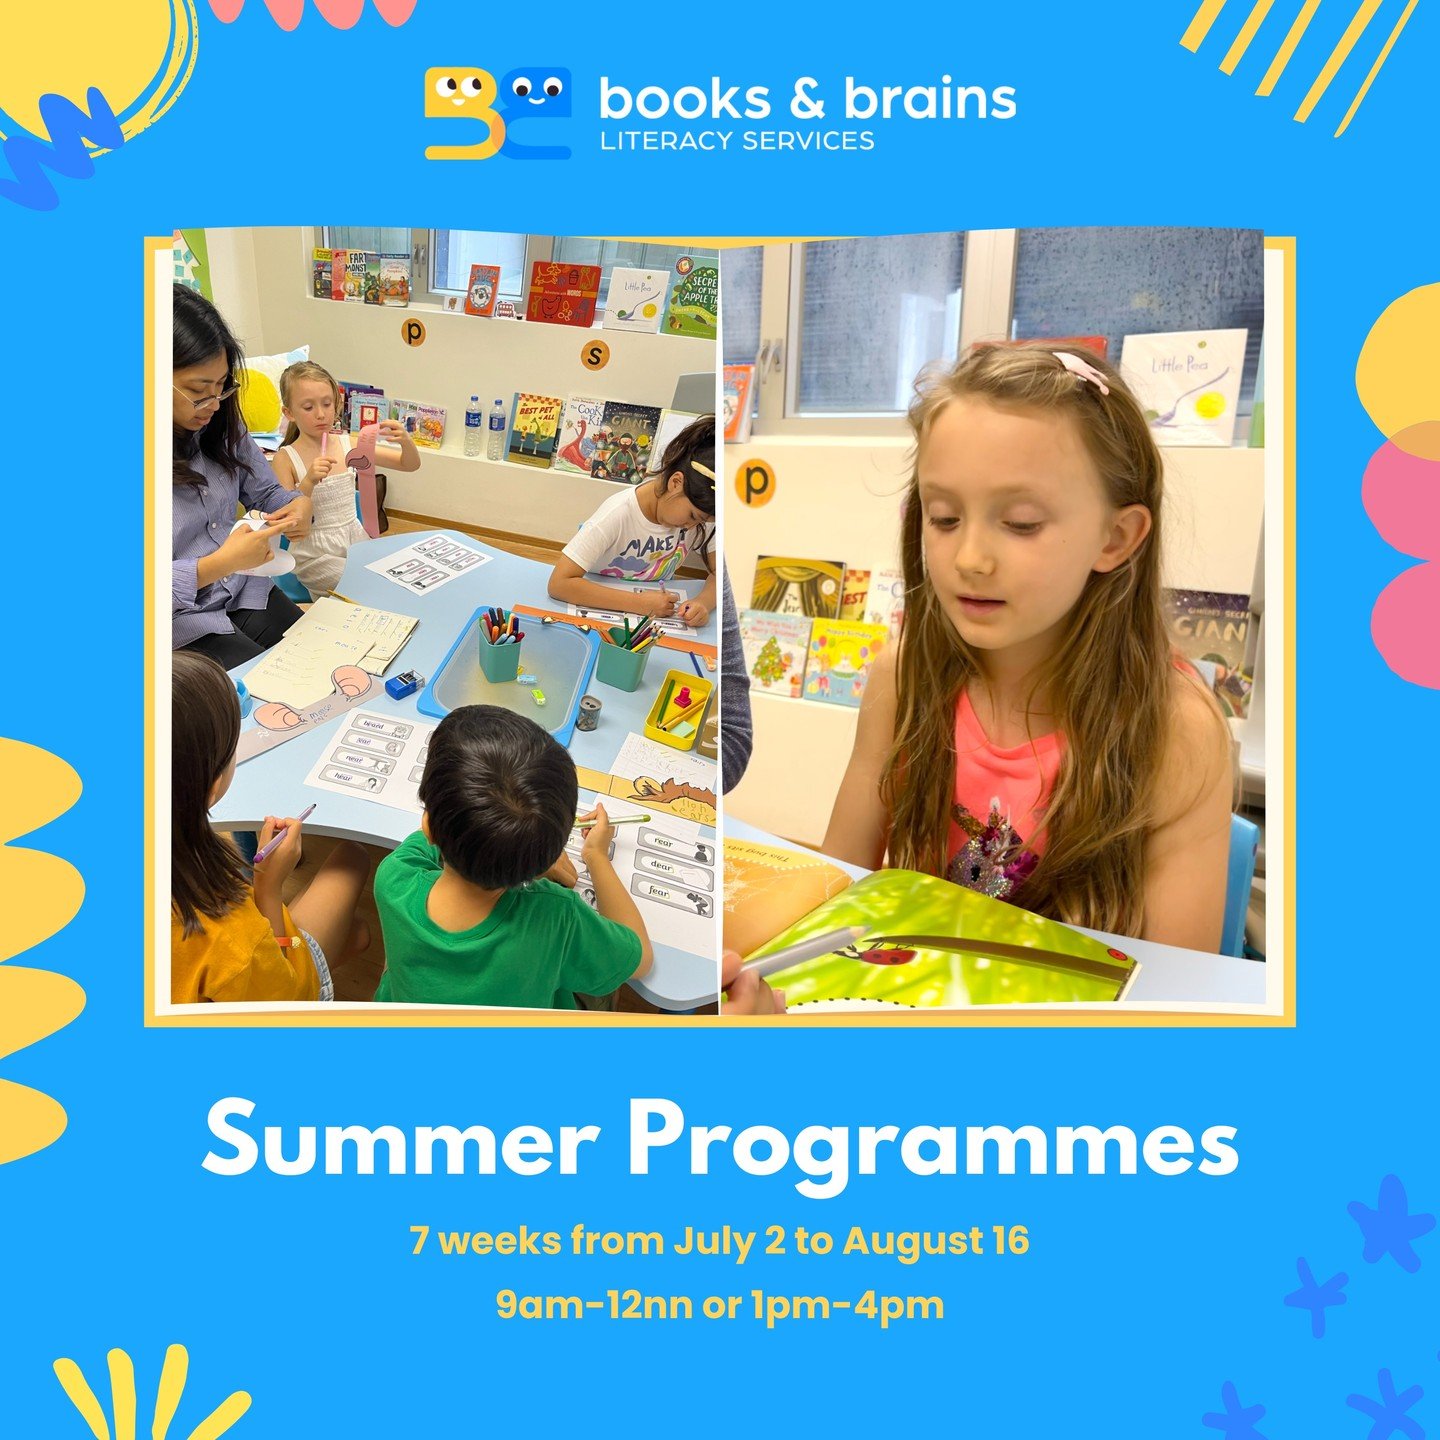 Looking for literacy classes for your kids (using the science of reading)?

Catch up, keep up or get ready for the next school year in our immersive Summer Programmes for kids aged 2.5+!

Chat with us via Whatsapp to sign up or find more details thro